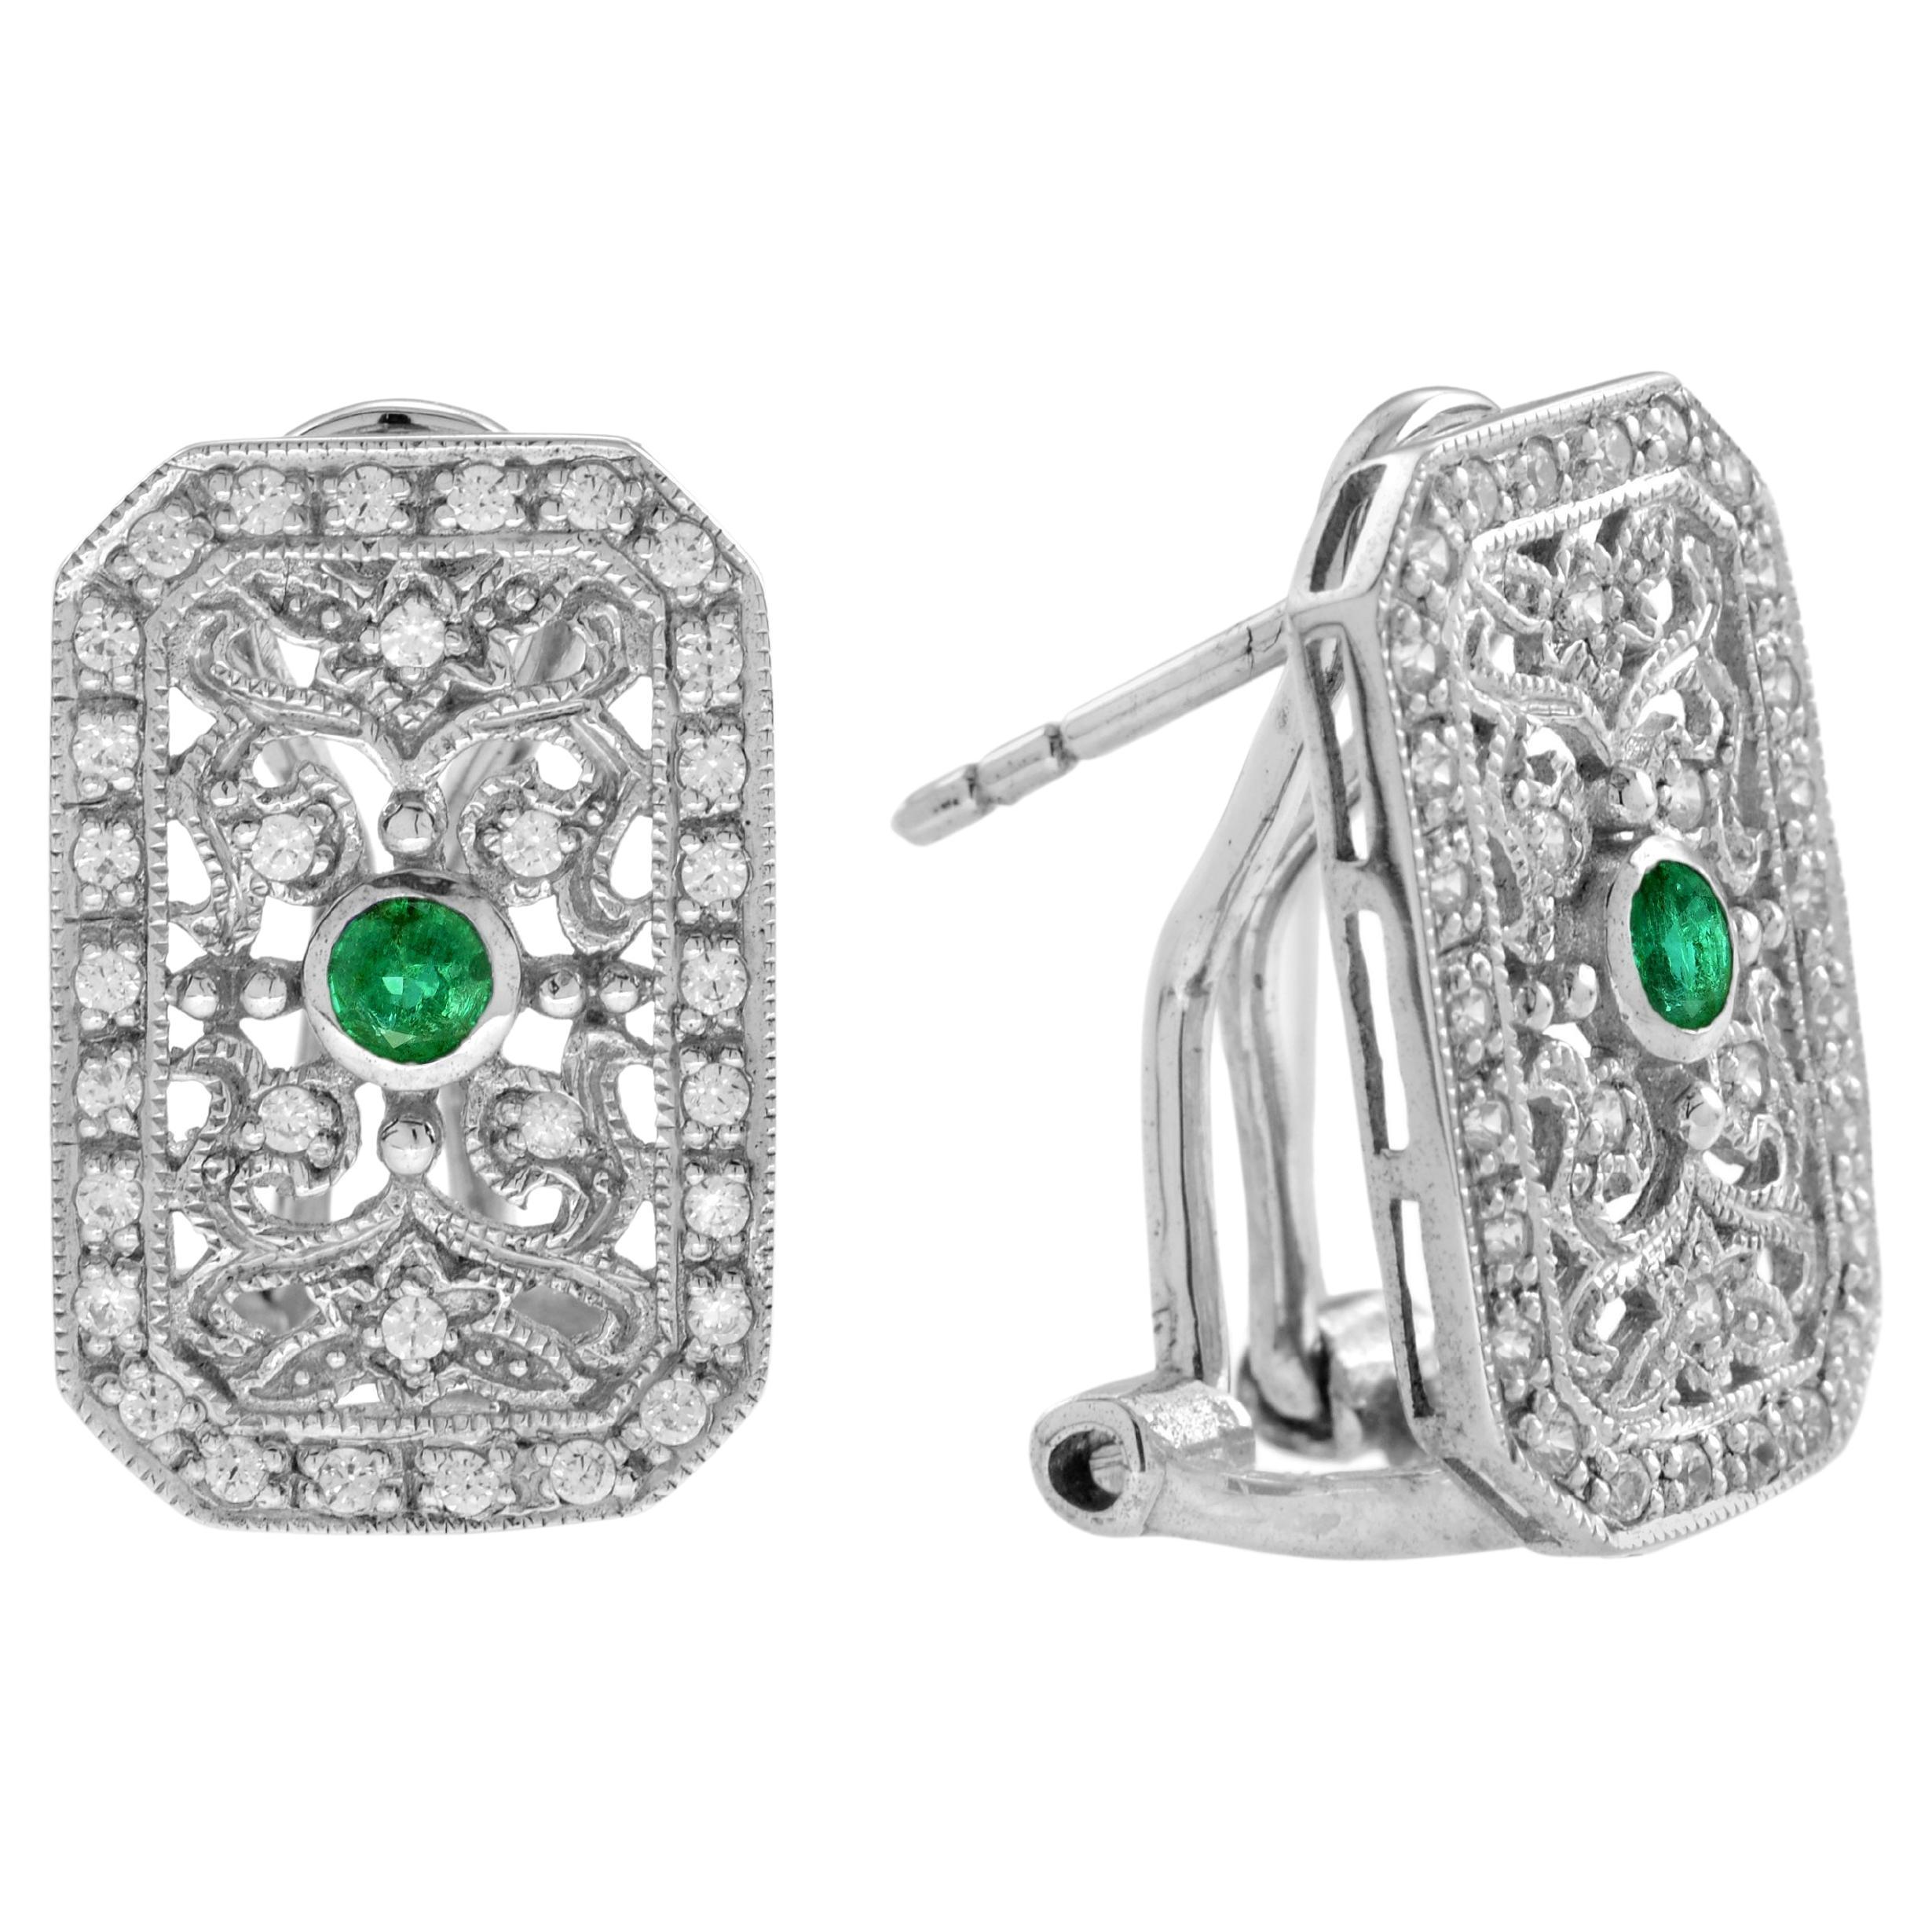 Emerald and Diamond Vintage Style Filigree Earrings in 14K White Gold